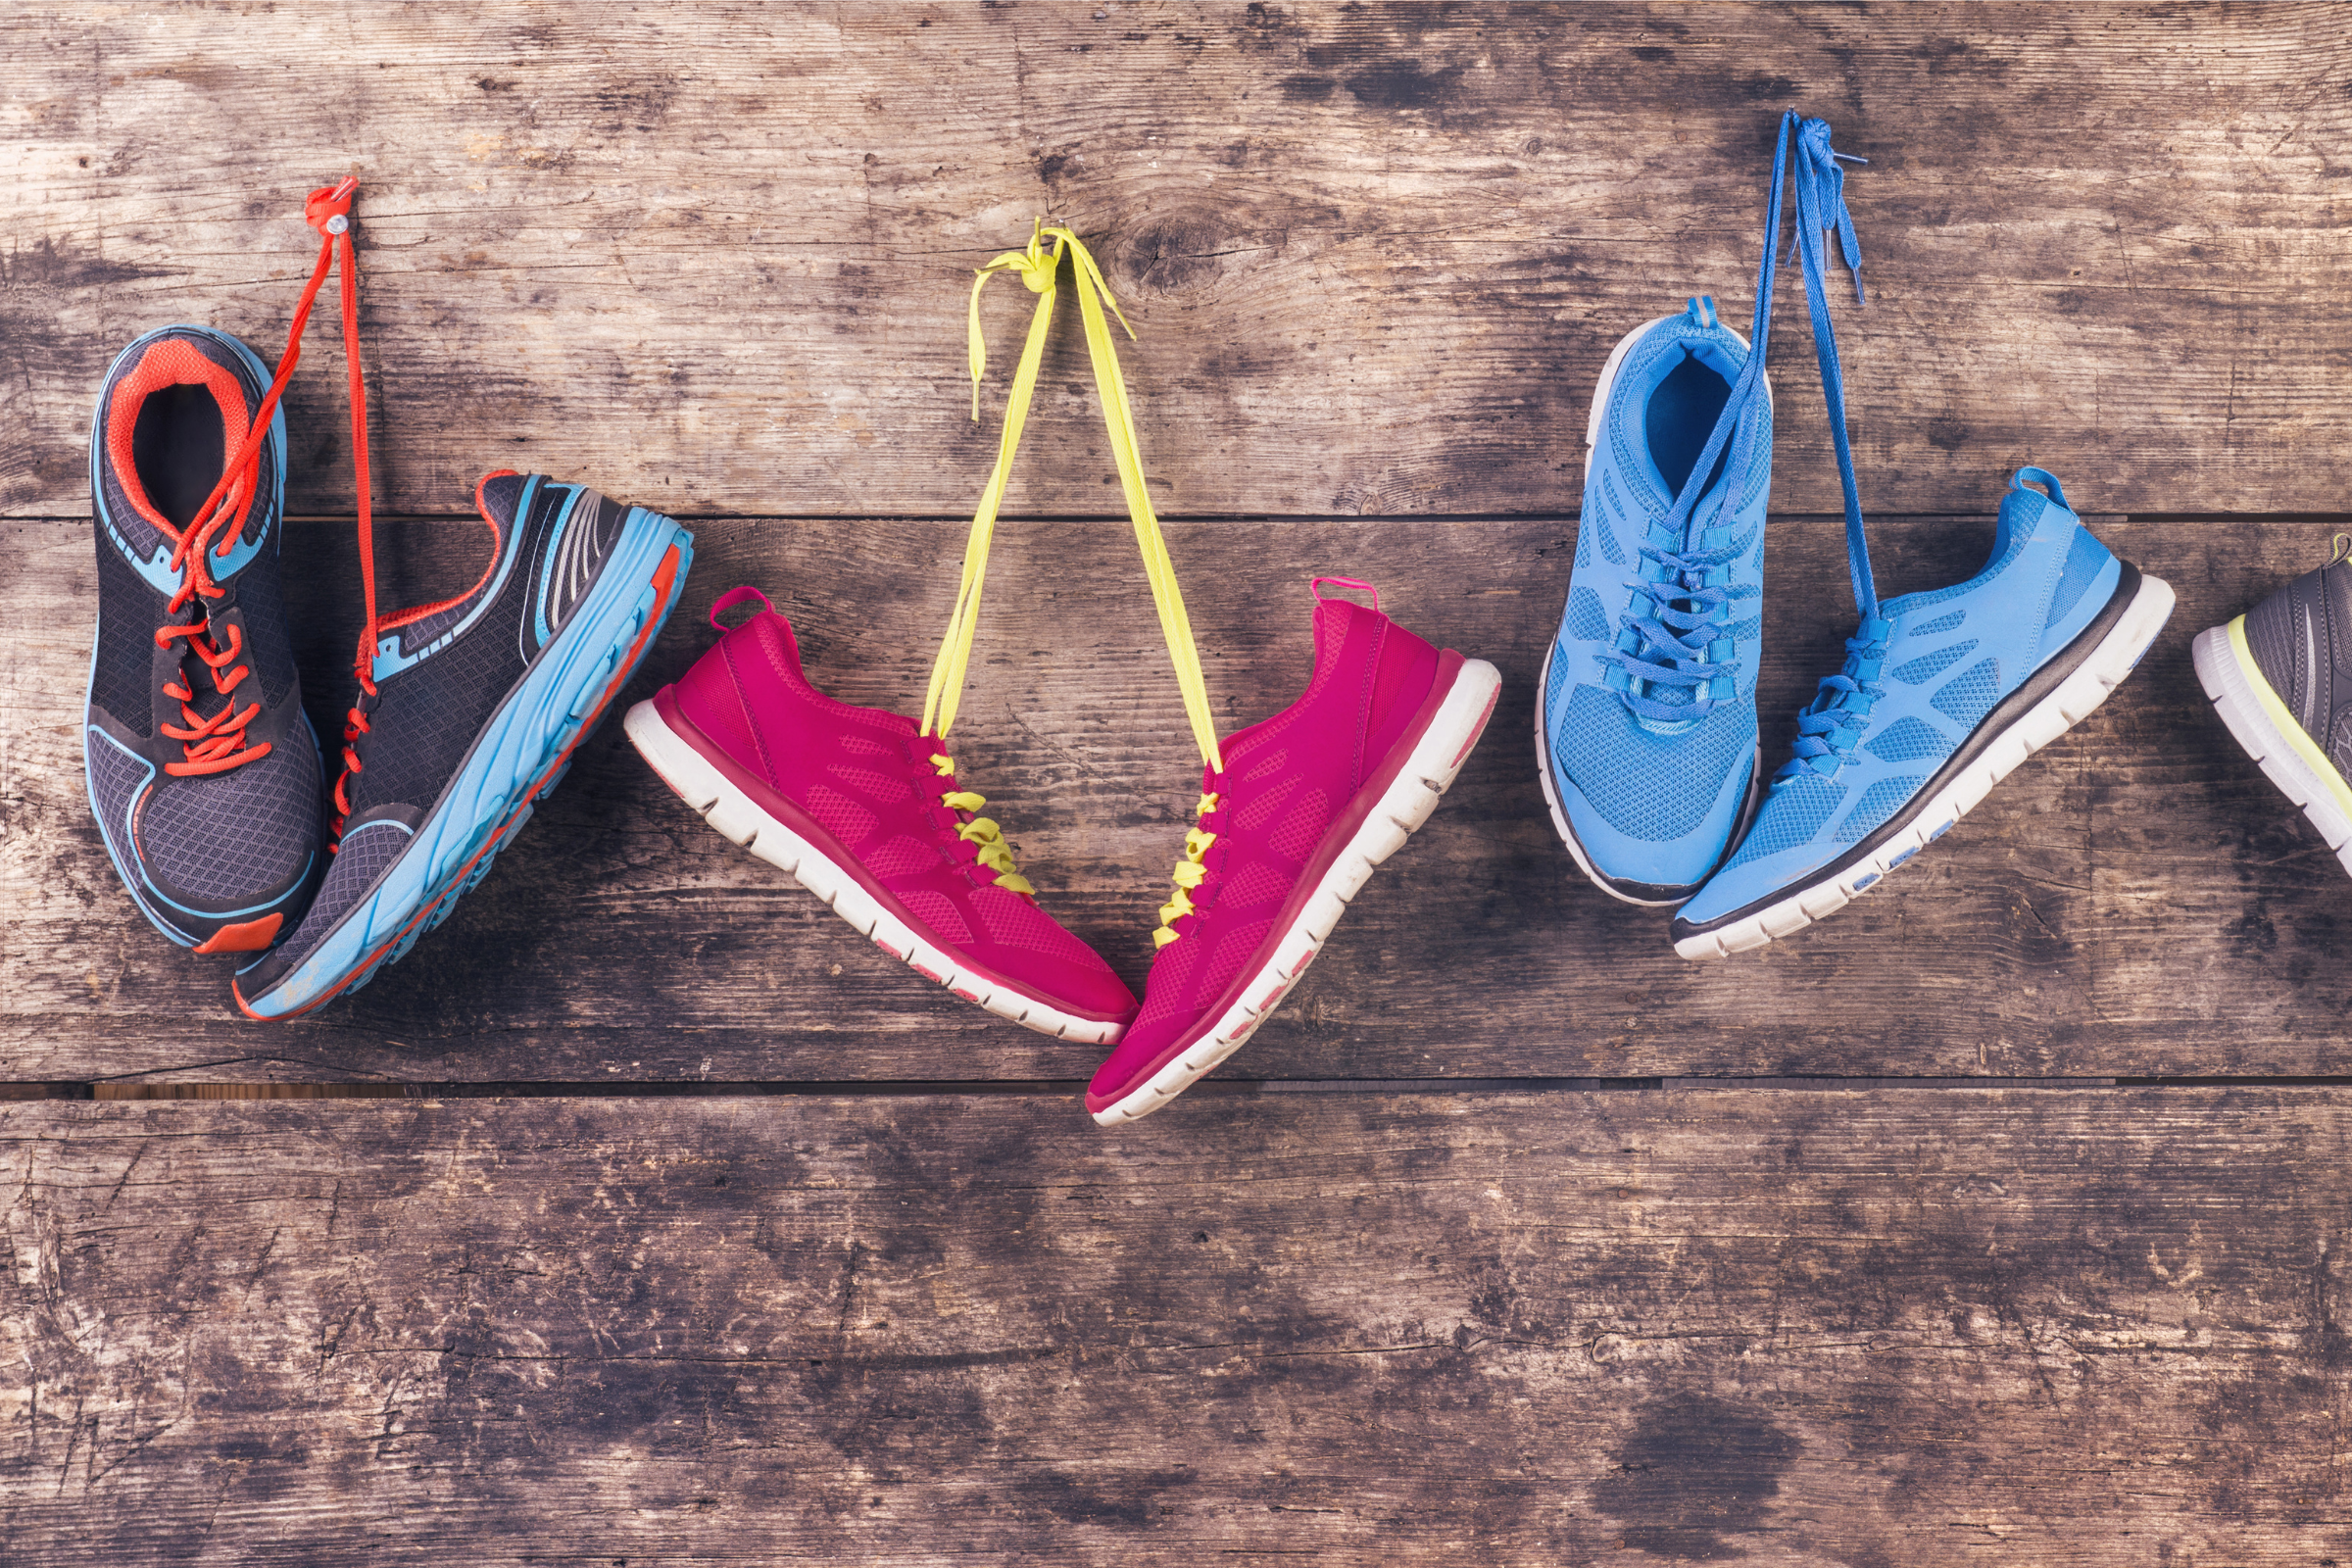 why are running shoes ugly?